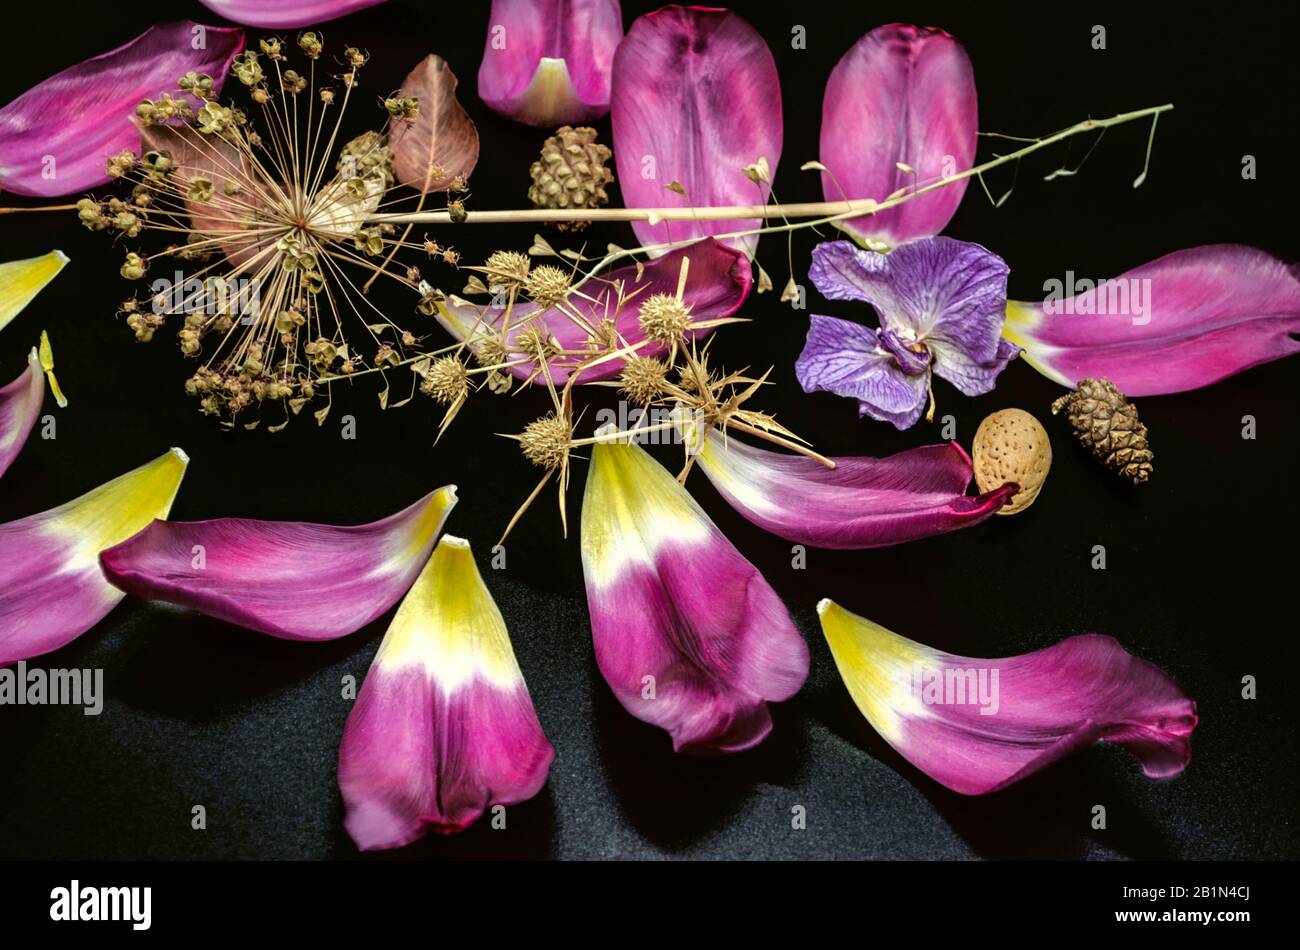 Black background with coniferous cones,thorns, decorative Allium,dry branch of a shepherd's bag,almonds and sparkling purple Tulip petals Stock Photo